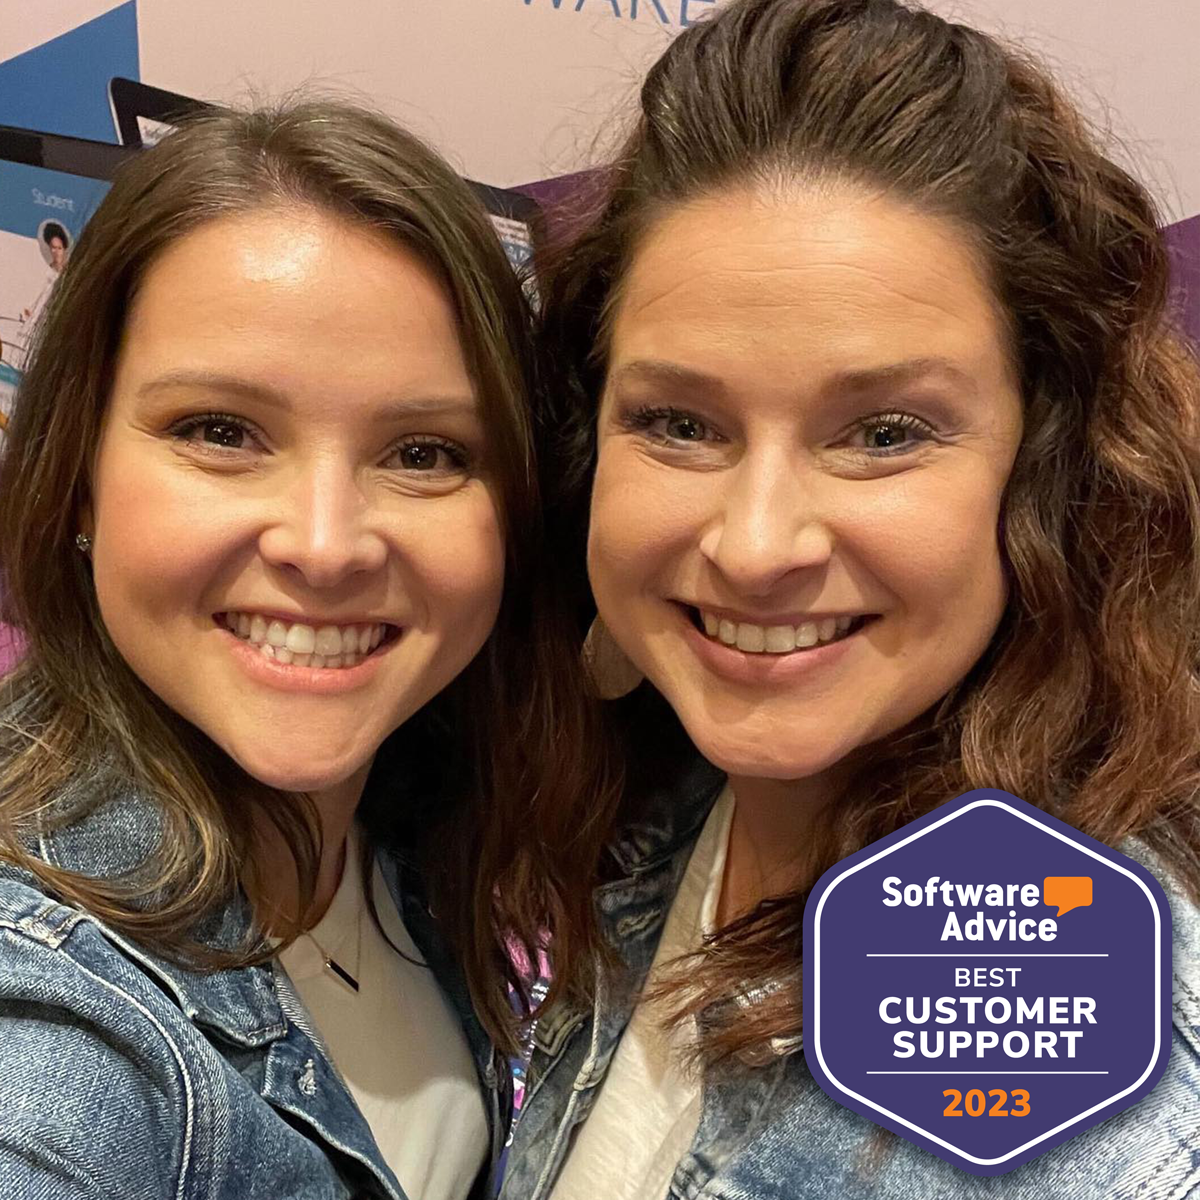 Molly and Amber selfie with software advice best customer support badge